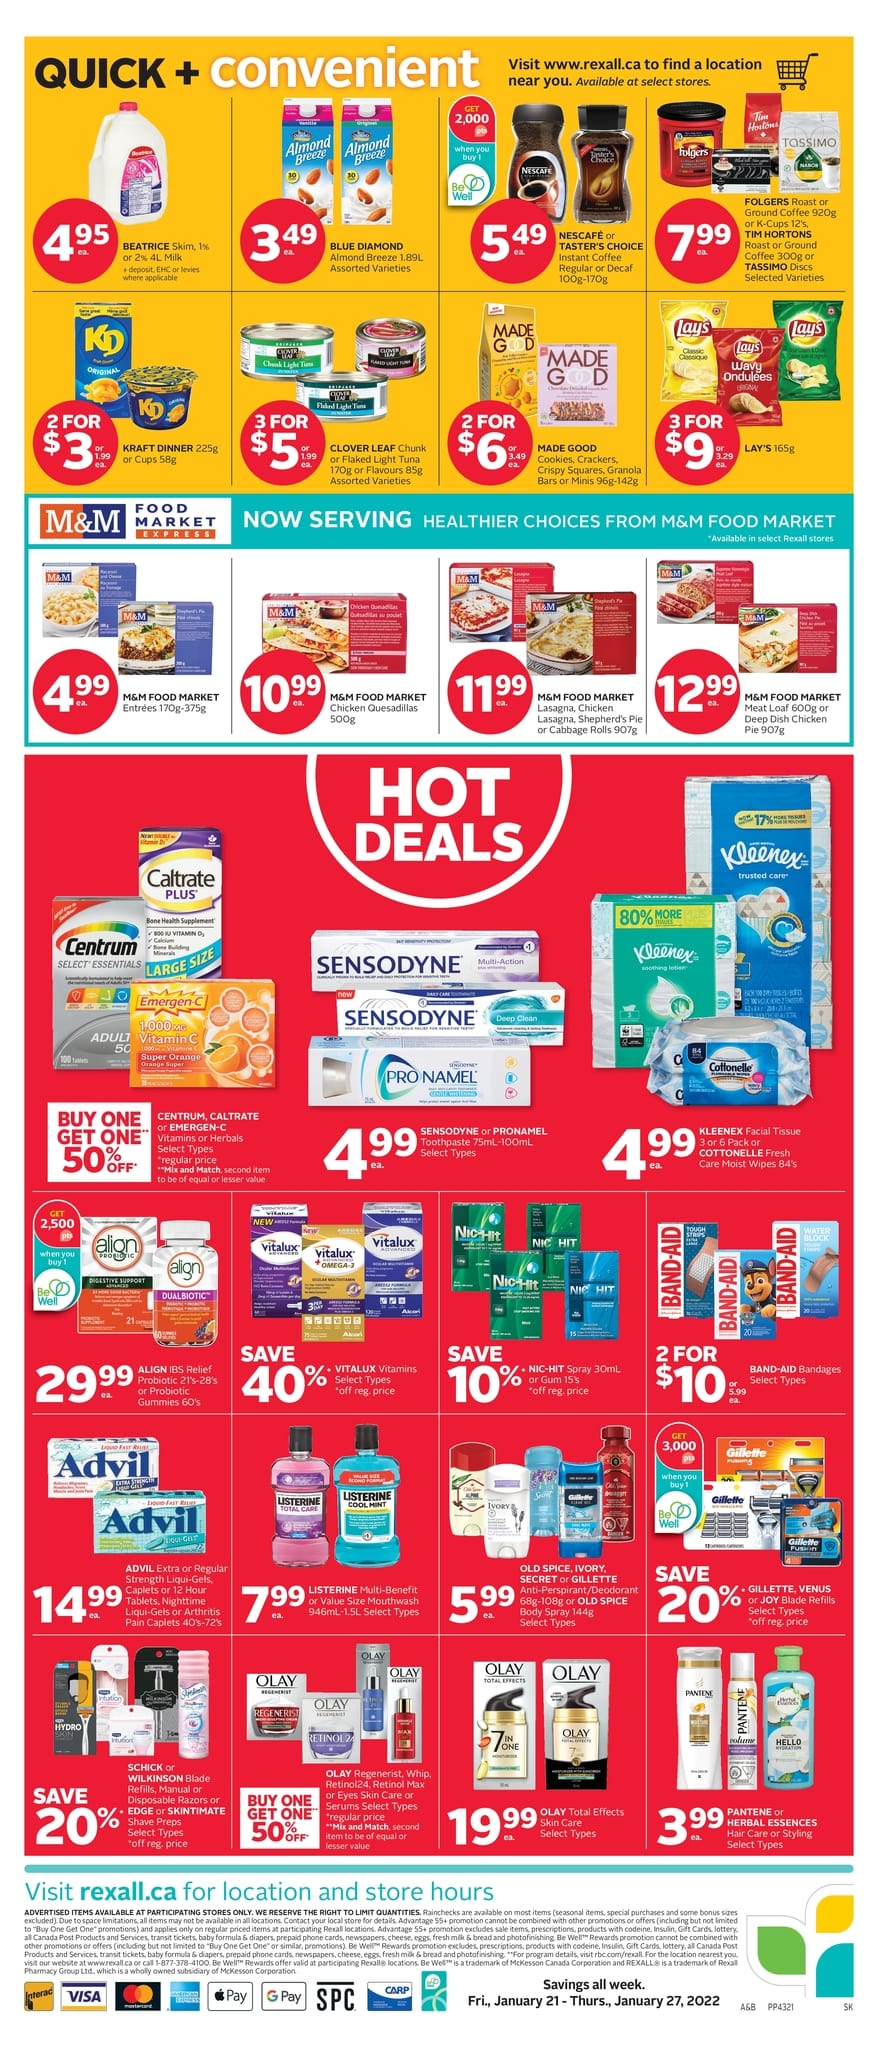 Rexall - Weekly Flyer Specials - Page 2